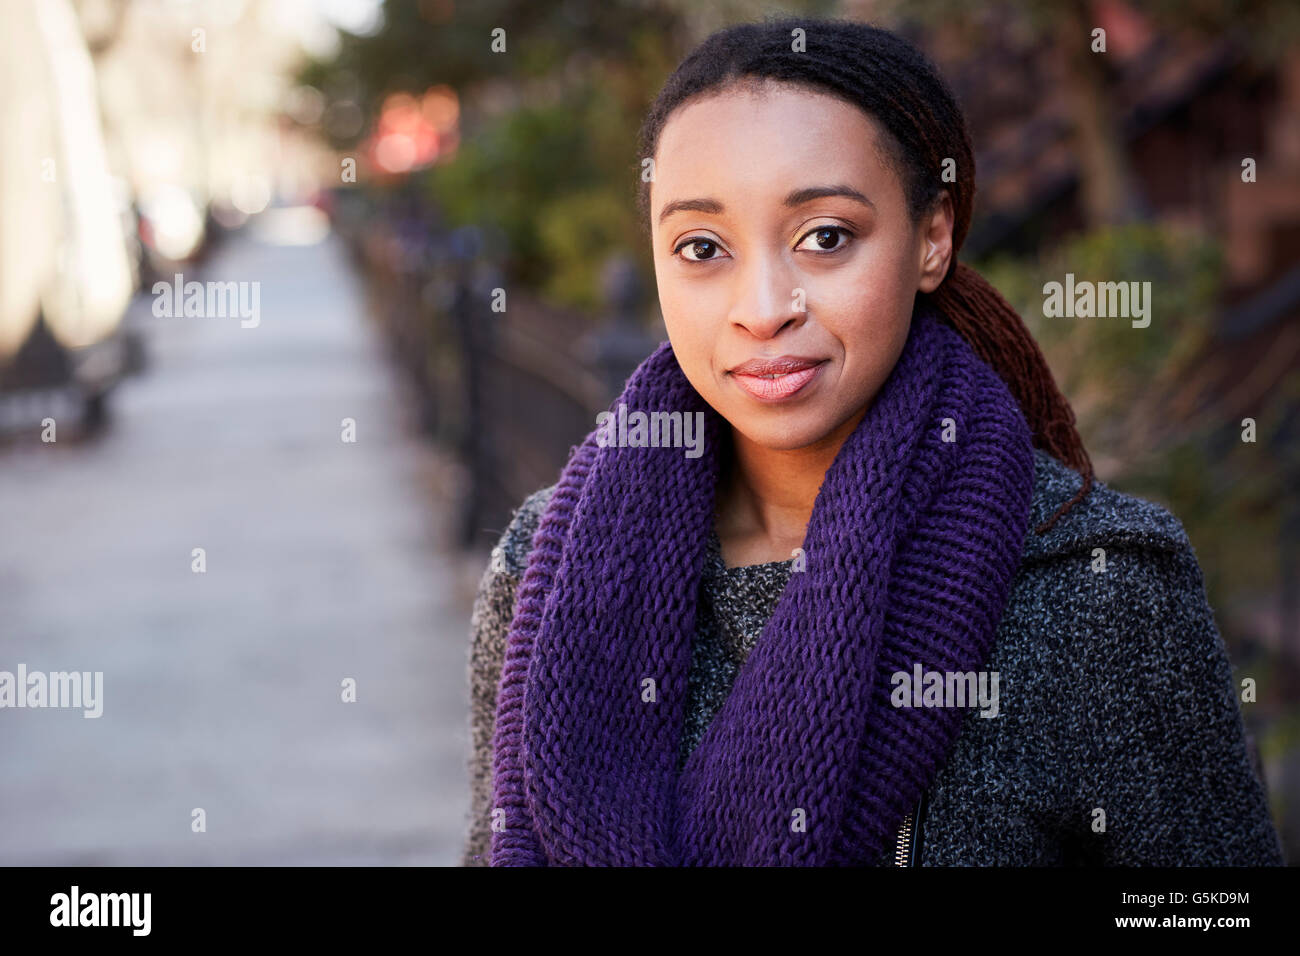 African American woman smiling outdoors Stock Photo